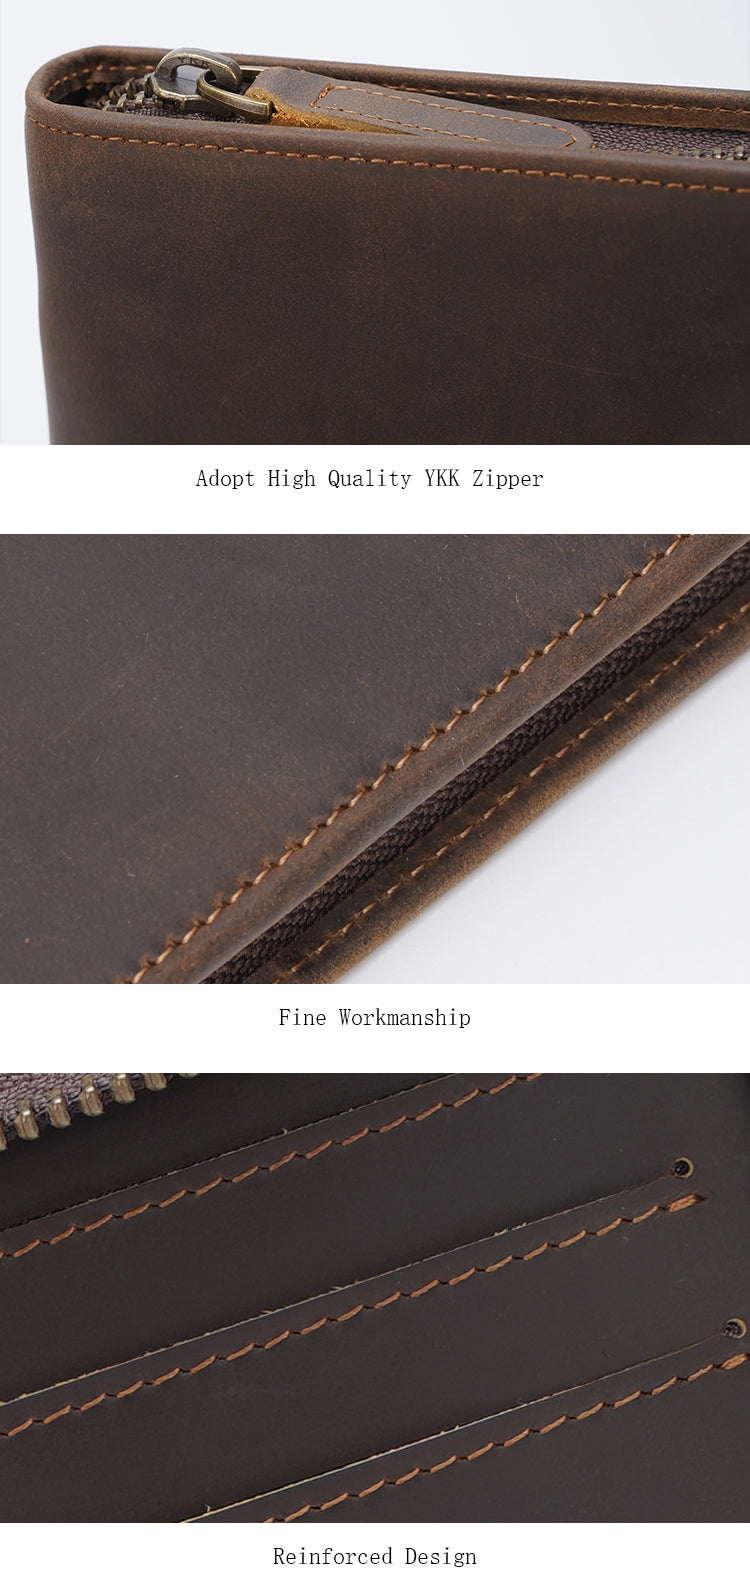 Different views of the RFID blocking cowhide leather multi-passport holder